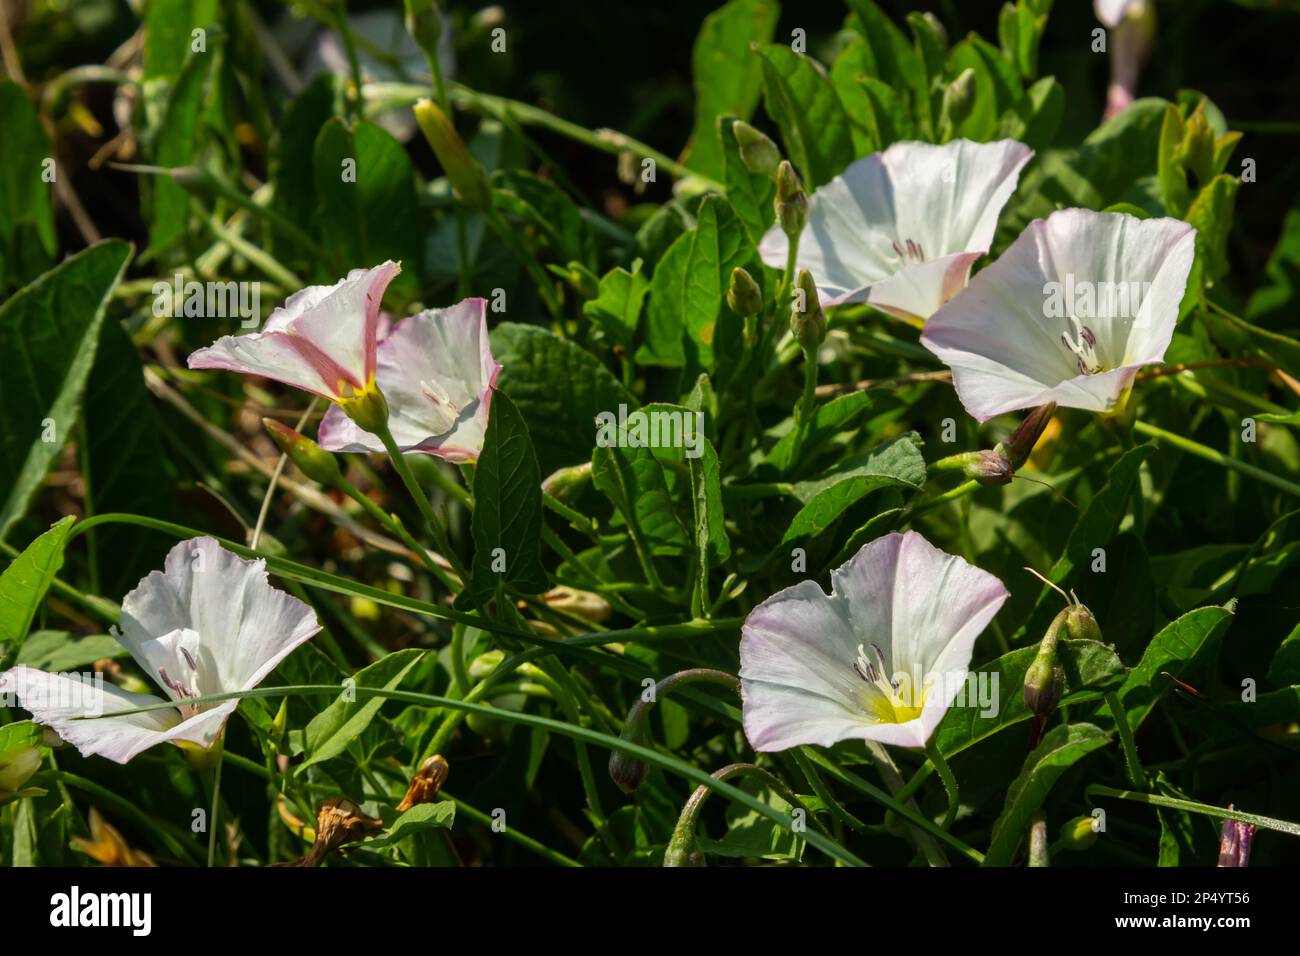 Field bindweed, Convolvulus arvensis European bindweed Creeping Jenny, Possession vine herbaceous perennial plant with open and closed white flowers s Stock Photo